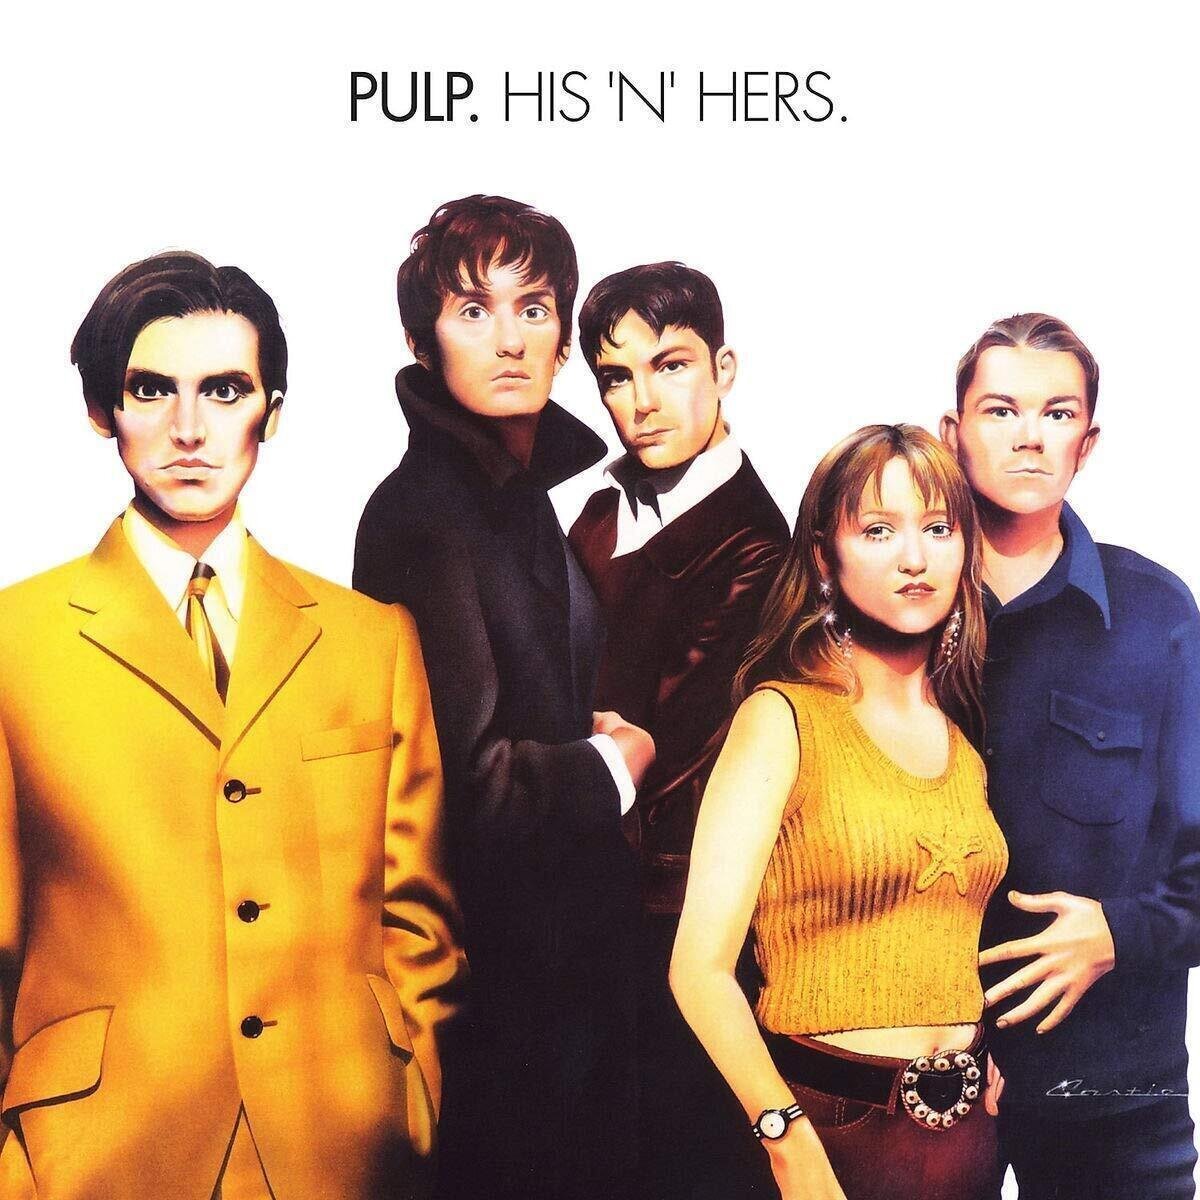 Pulp - His 'N' Hers (Deluxe Edition) (Remastered) (2 LP) Pulp